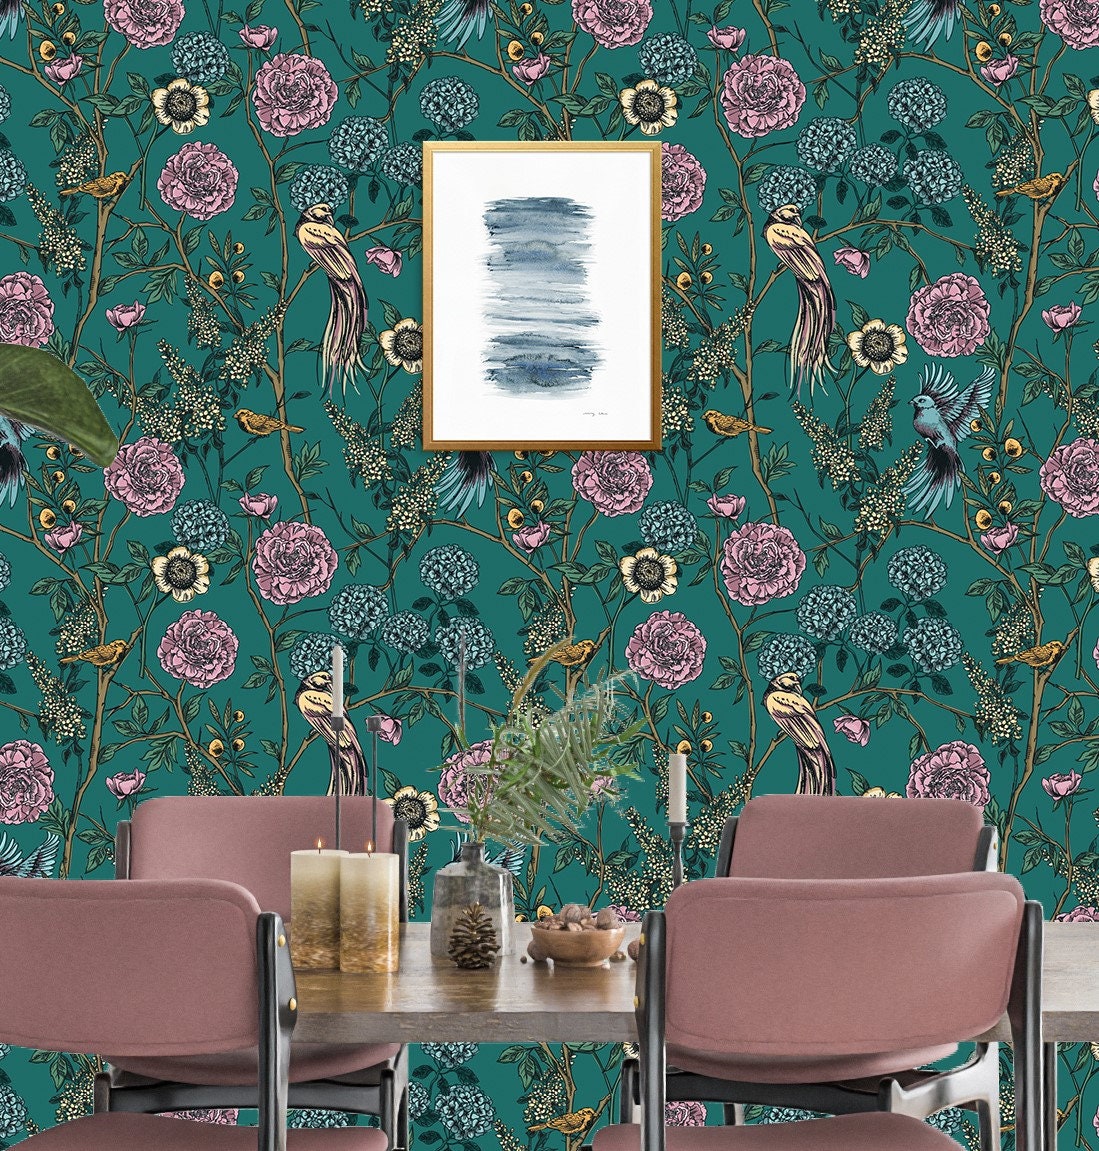 Chinoiserie Wallpaper Peel and Stick Vintage Floral Wallpaper Green Peacock Wallpaper Removable Wall Paper